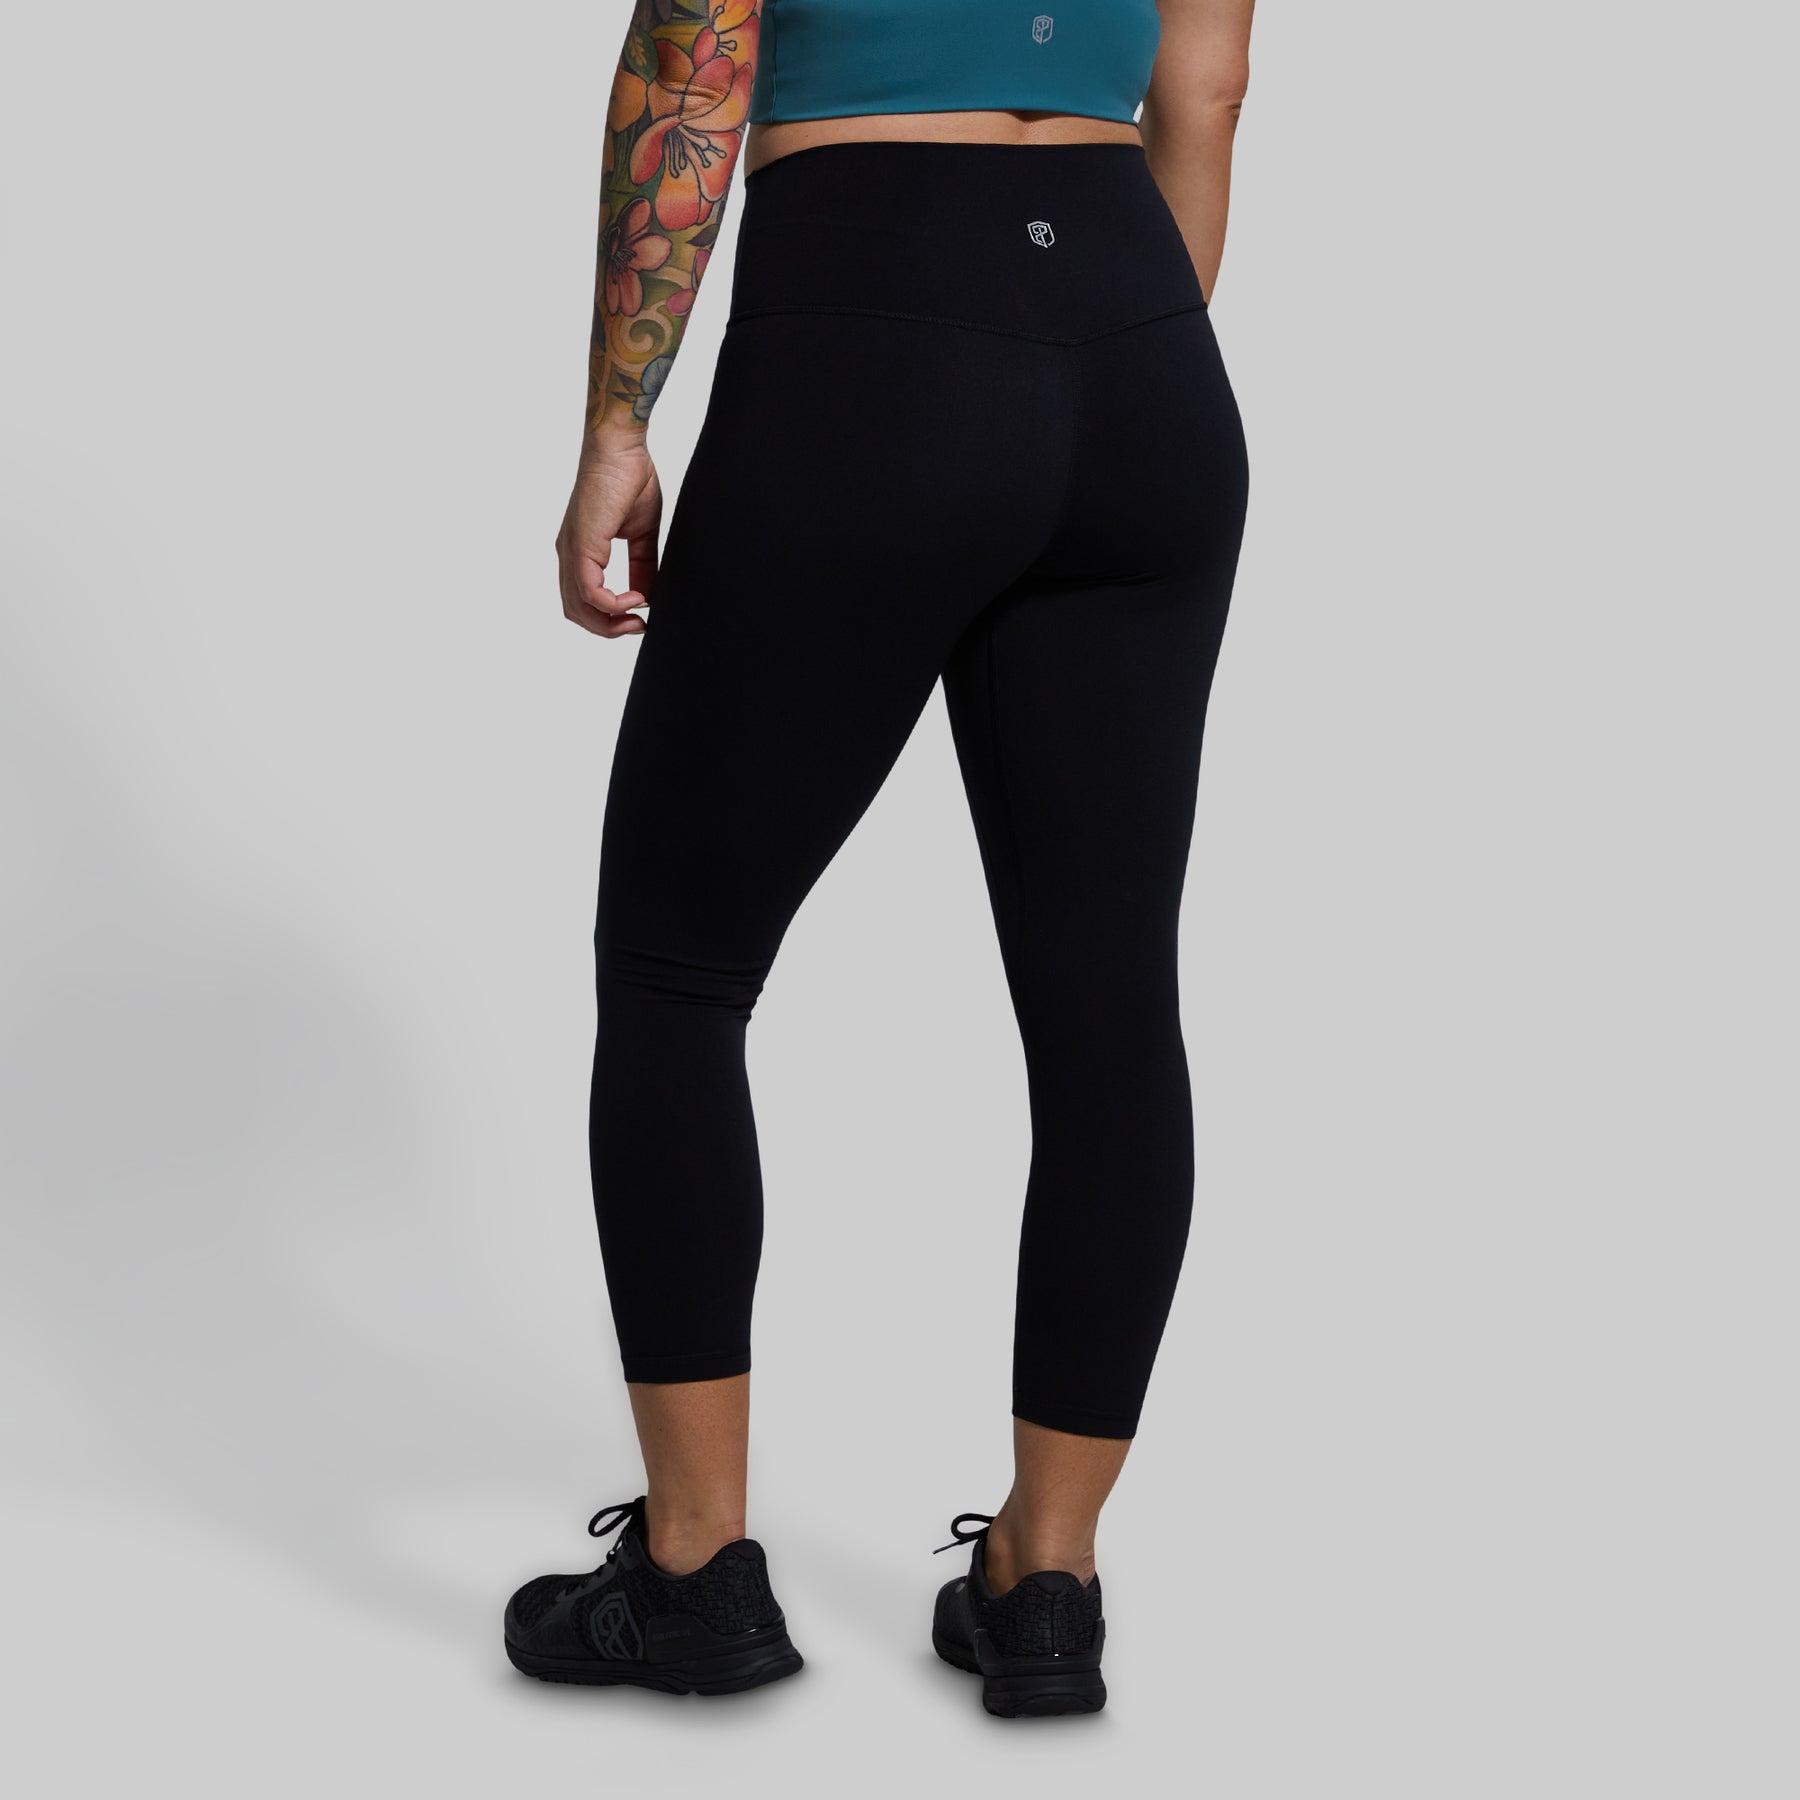 Strength is beautiful. New Inspire leggings, bodysuits and more